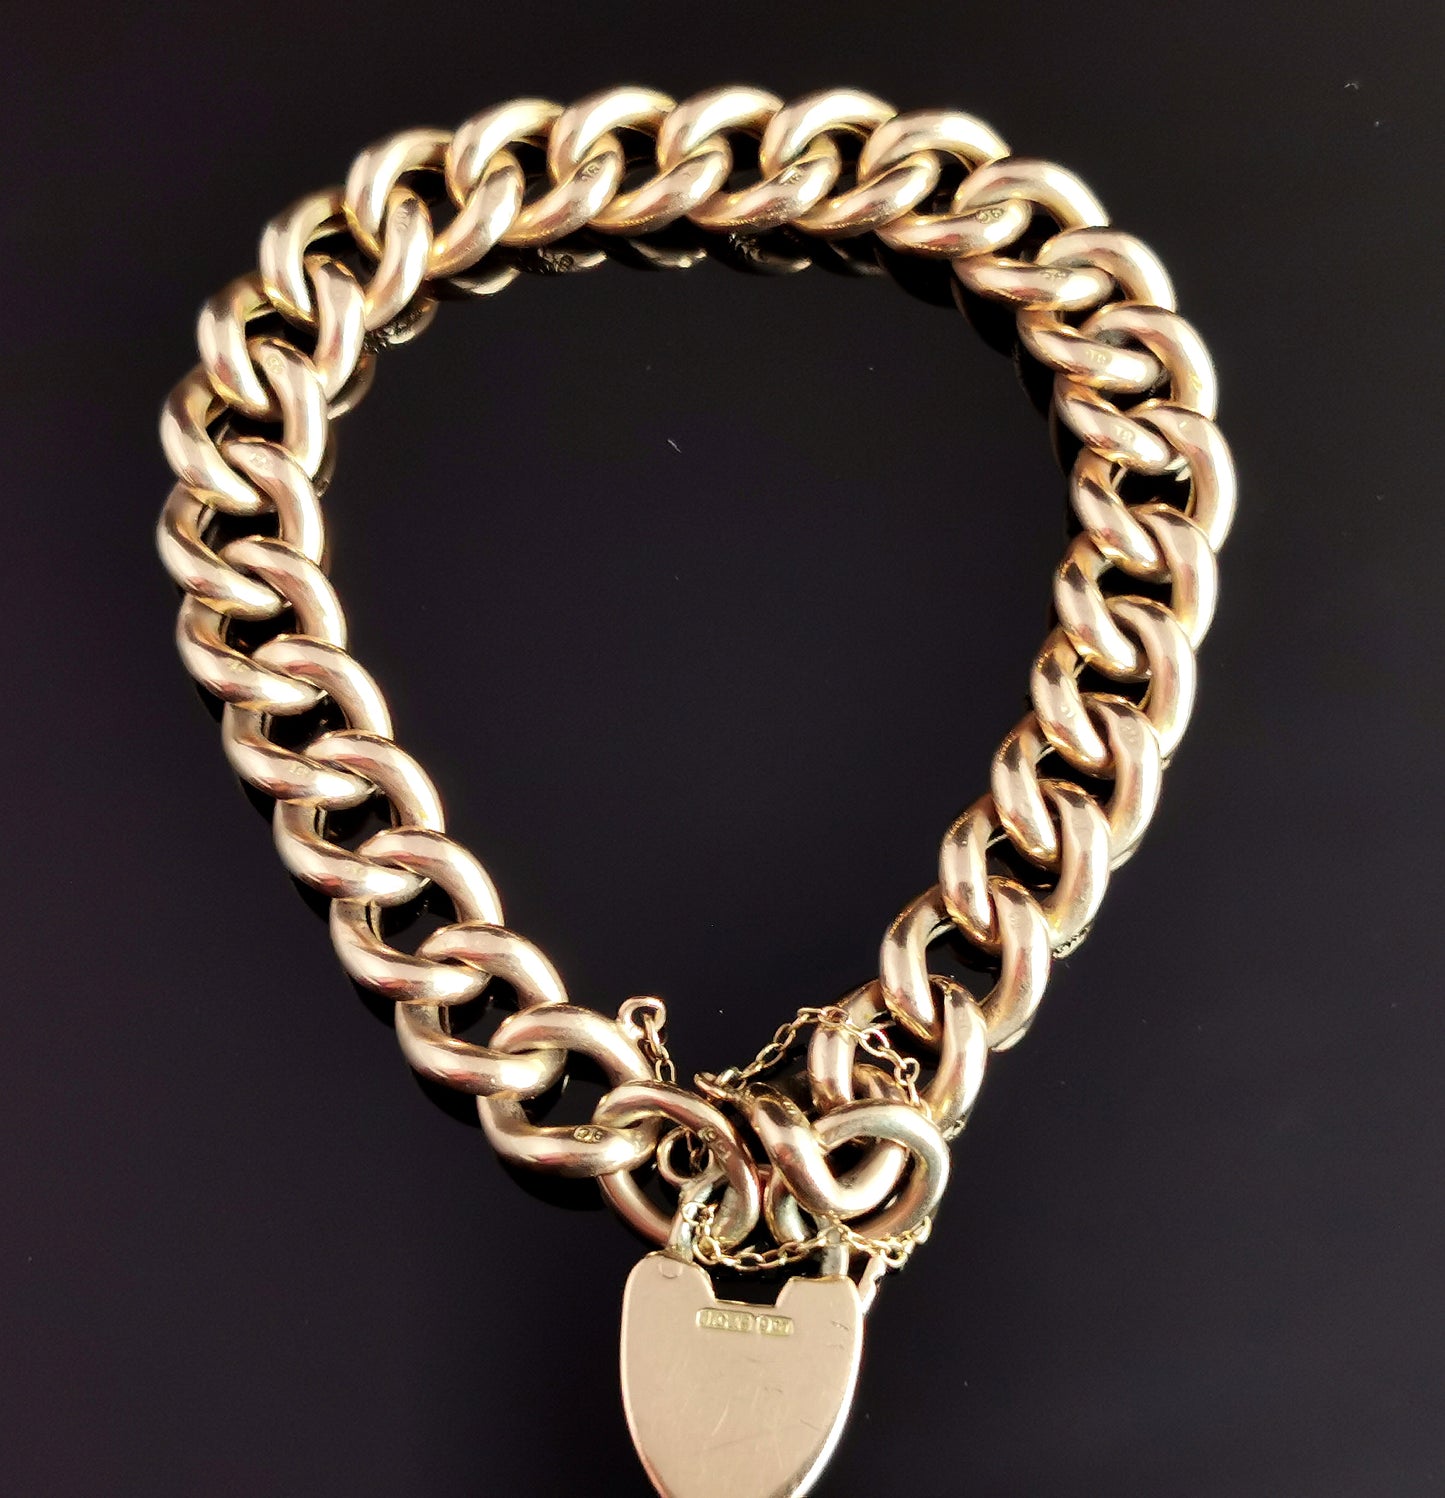 Antique 9ct gold curb link bracelet, Victorian, Day to night